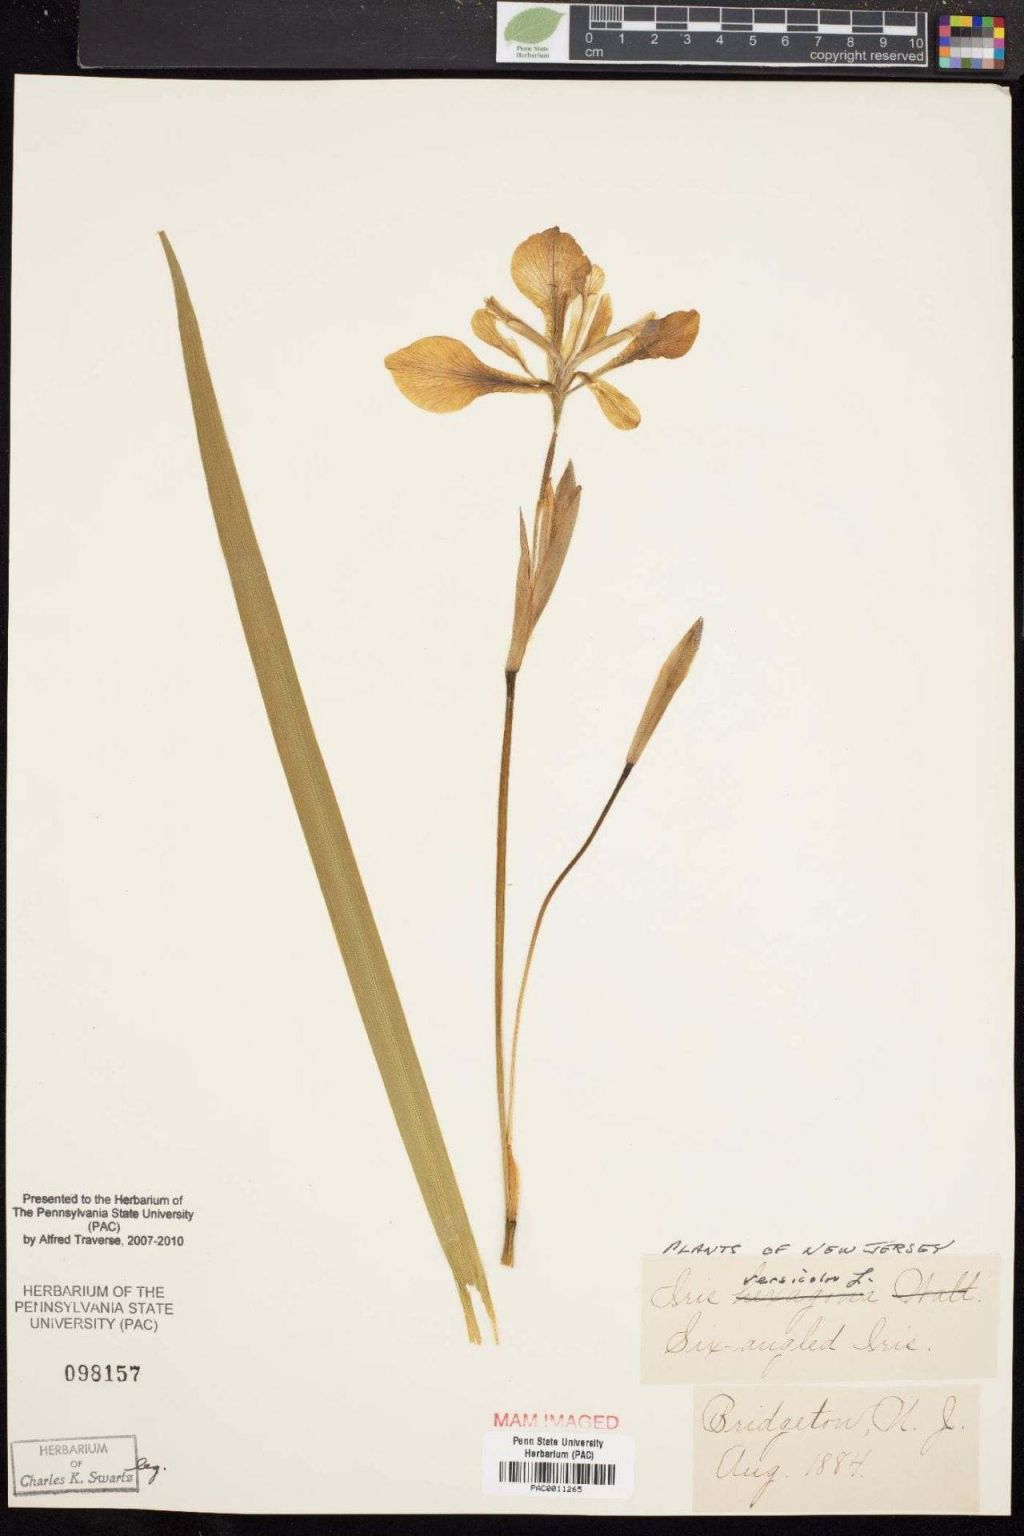 Voucher specimen of Iris versicolor from the PAC collection